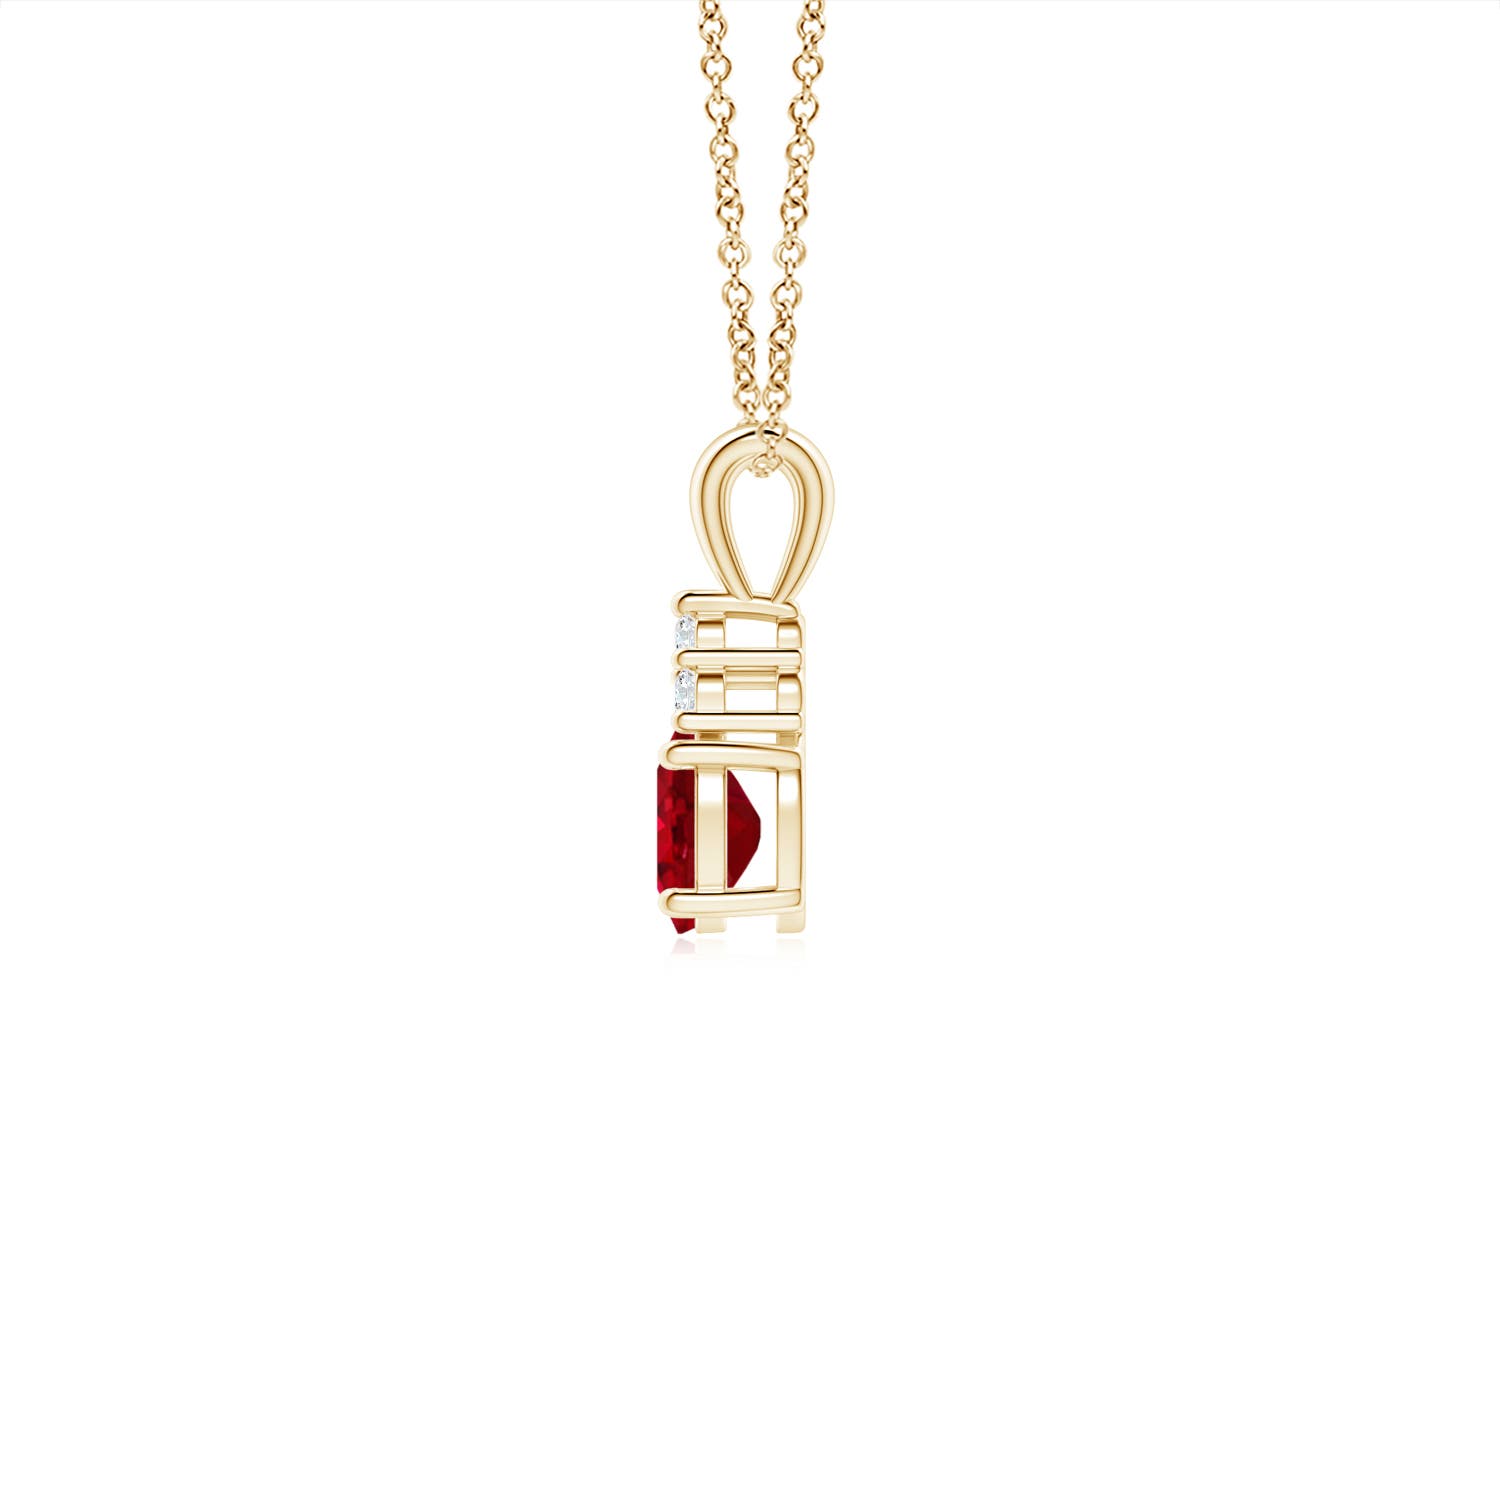 Shop Ruby Pendant Necklaces for Women | Angara